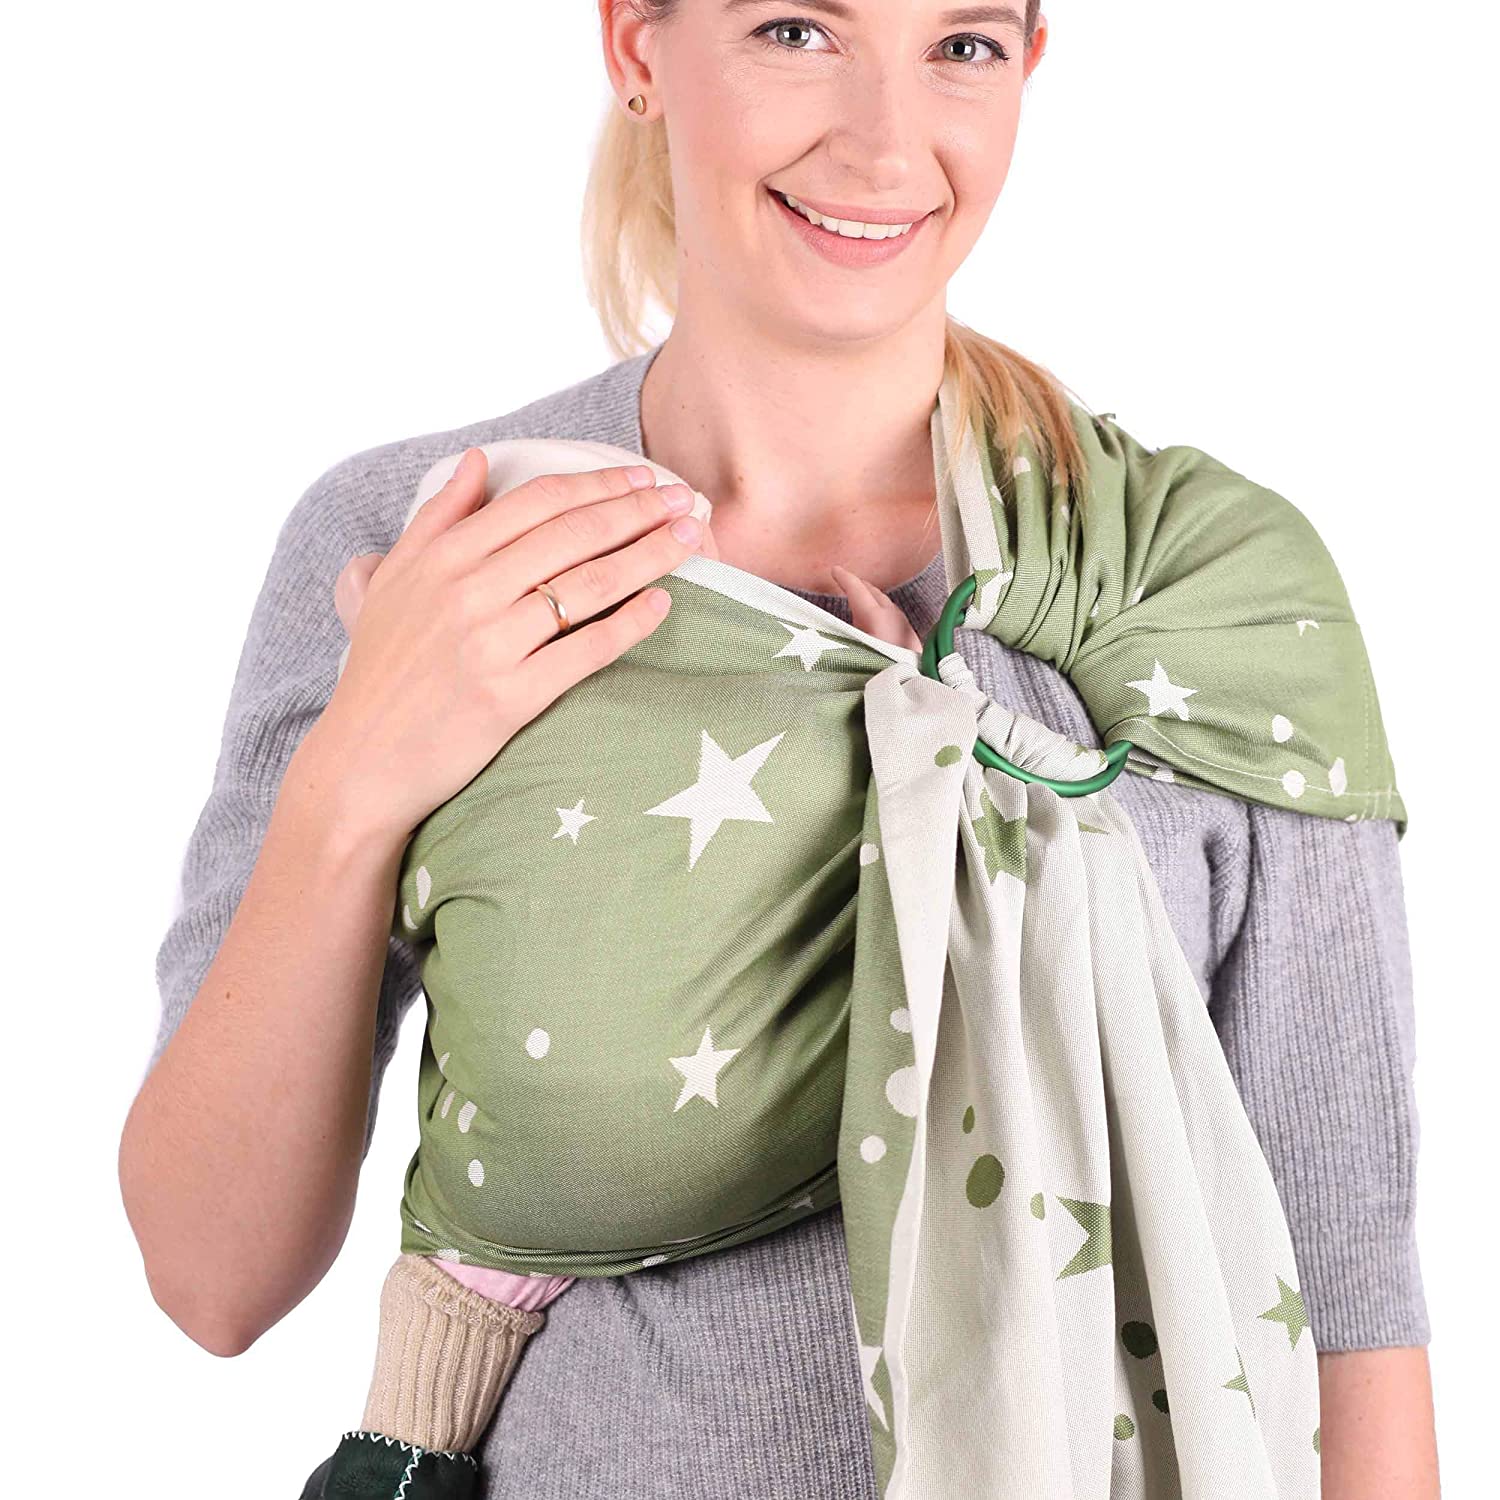 Schmusewolke Ring Sling Baby Sling Hybrid Structured Weave Mirastar Olivine Organic Cotton 70 x 215 cm Baby Size Toddler Size Newborn and Toddlers 0-60 Months 3-16 kg Hip Carrier